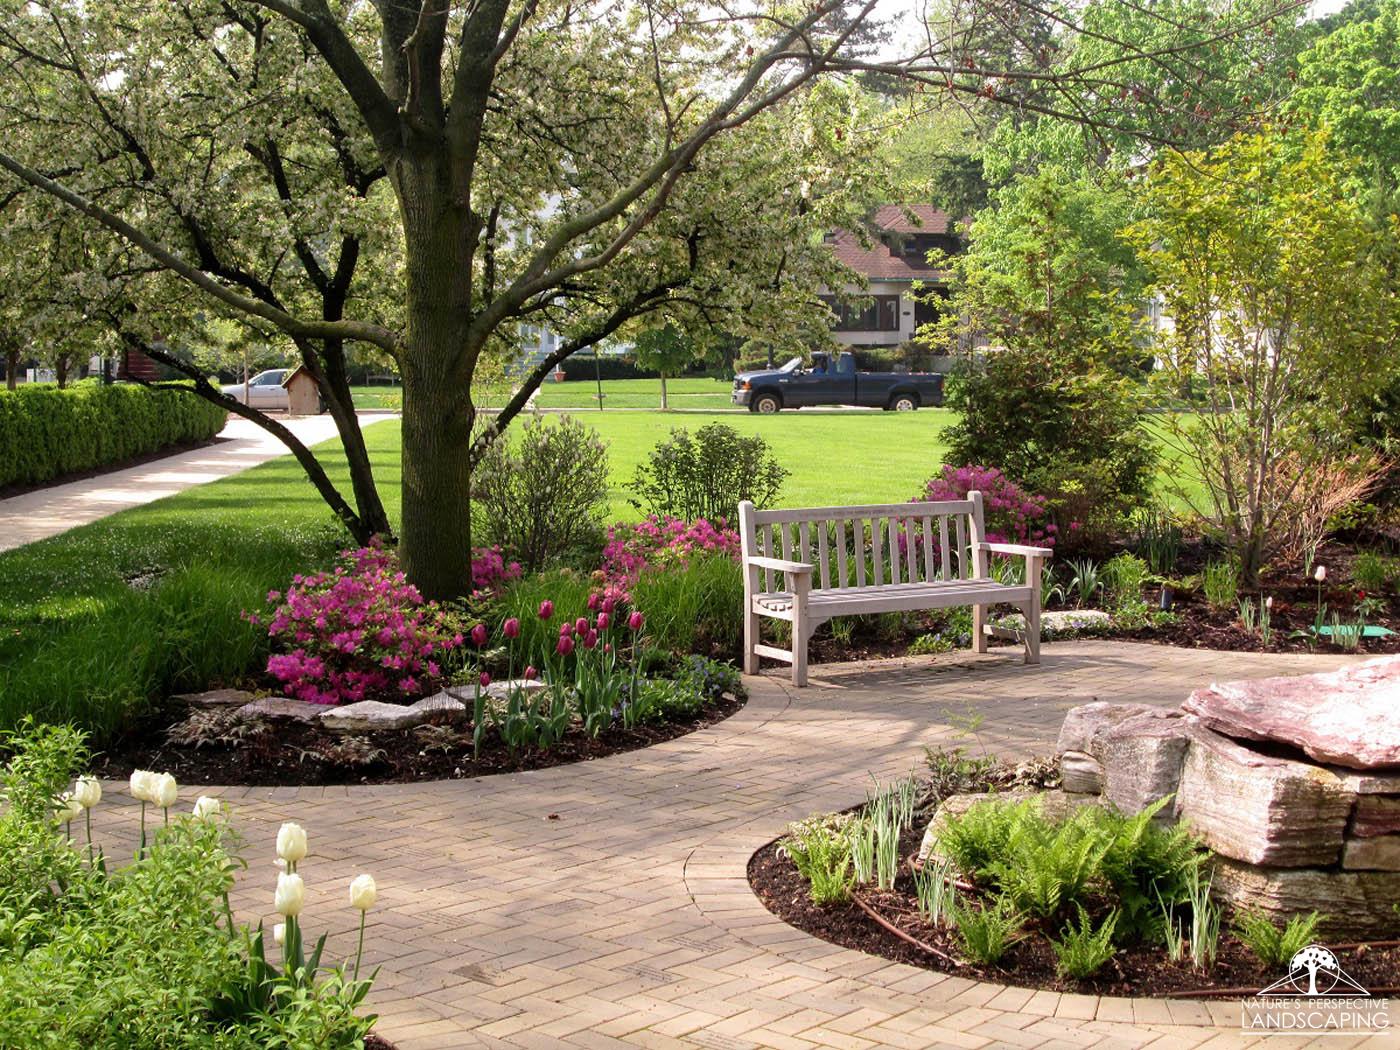 spring tulips, azaleas and bench - Nature's Perspective Landscaping